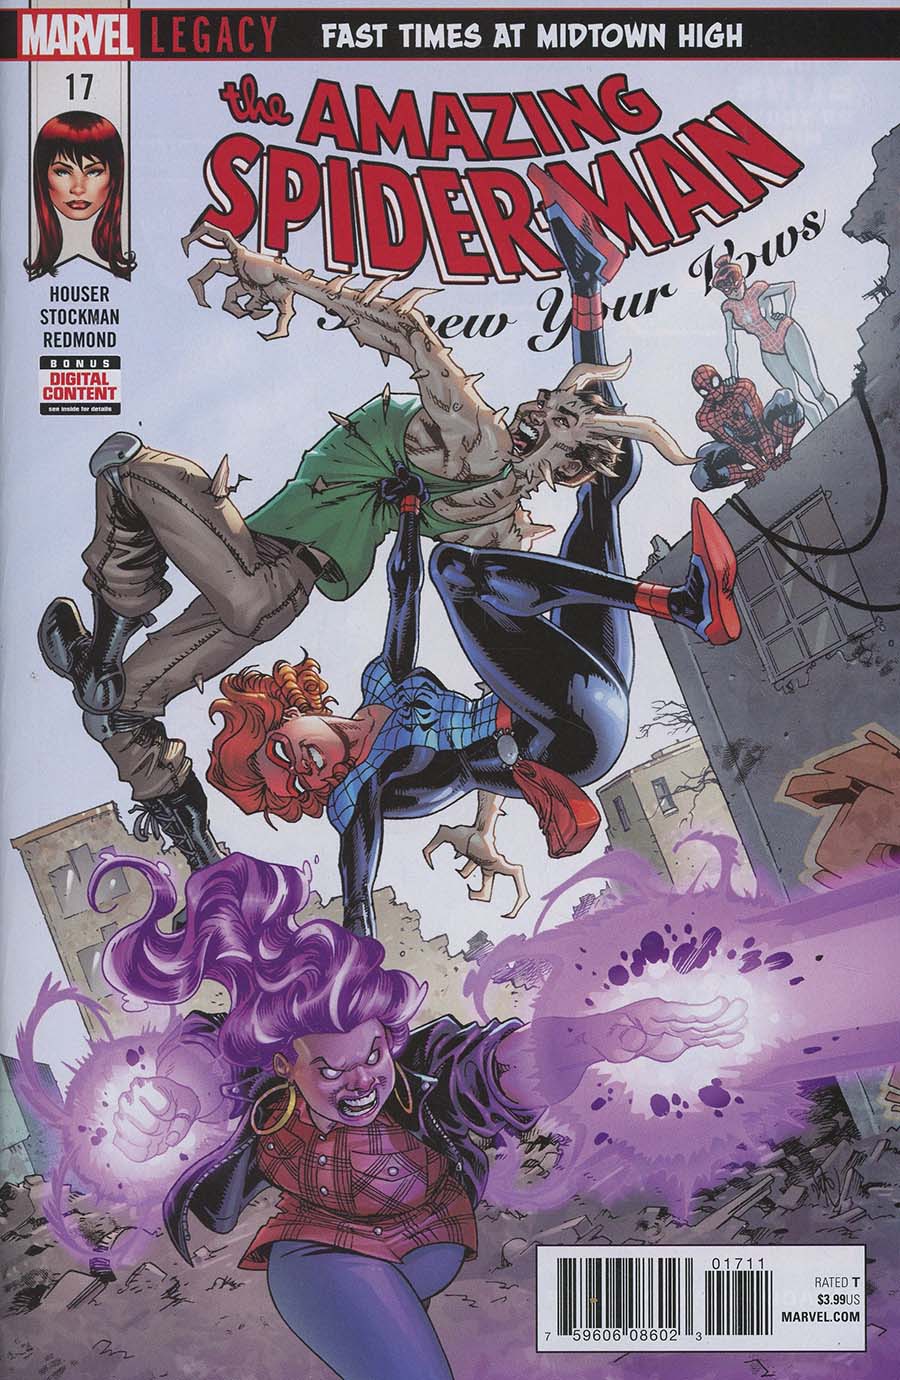 Amazing Spider-Man Renew Your Vows Vol 2 #17 (Marvel Legacy Tie-In)